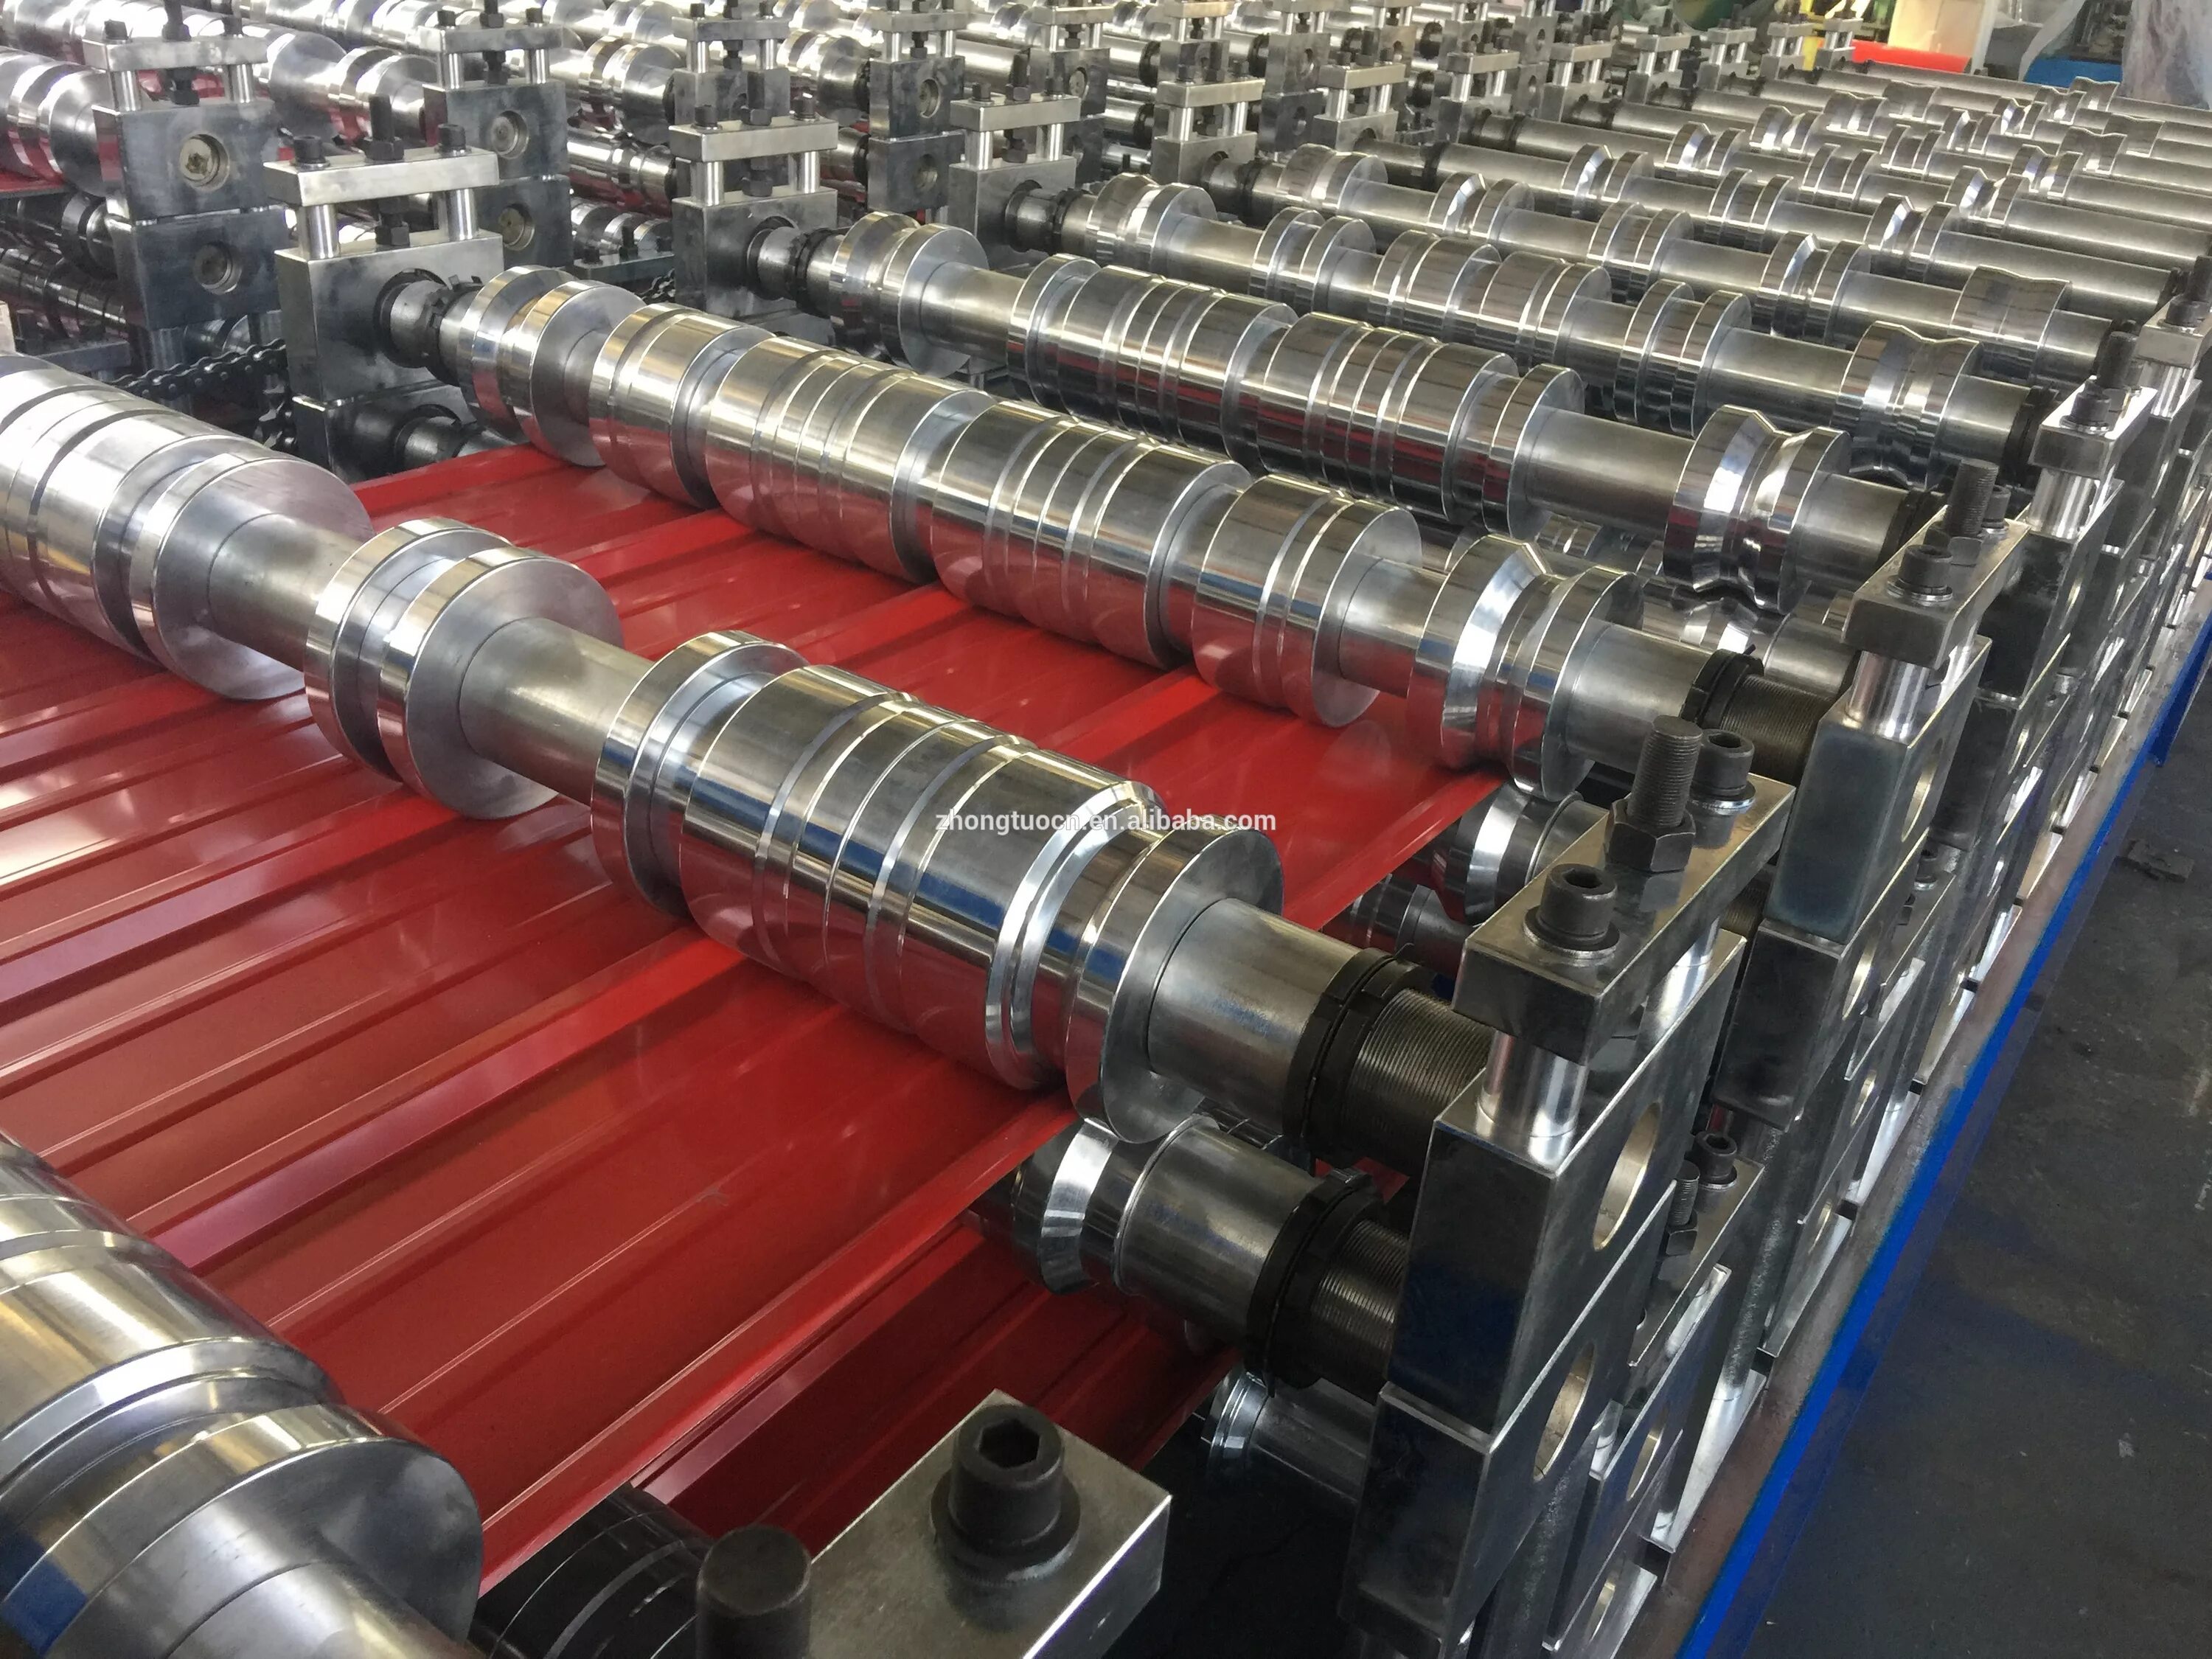 Roll forming. Sheet Metal Roll forming. Double layer Roll forming Machine from wadzhai. Double layer Roll forming Machine from Shibo. Roll forming process.